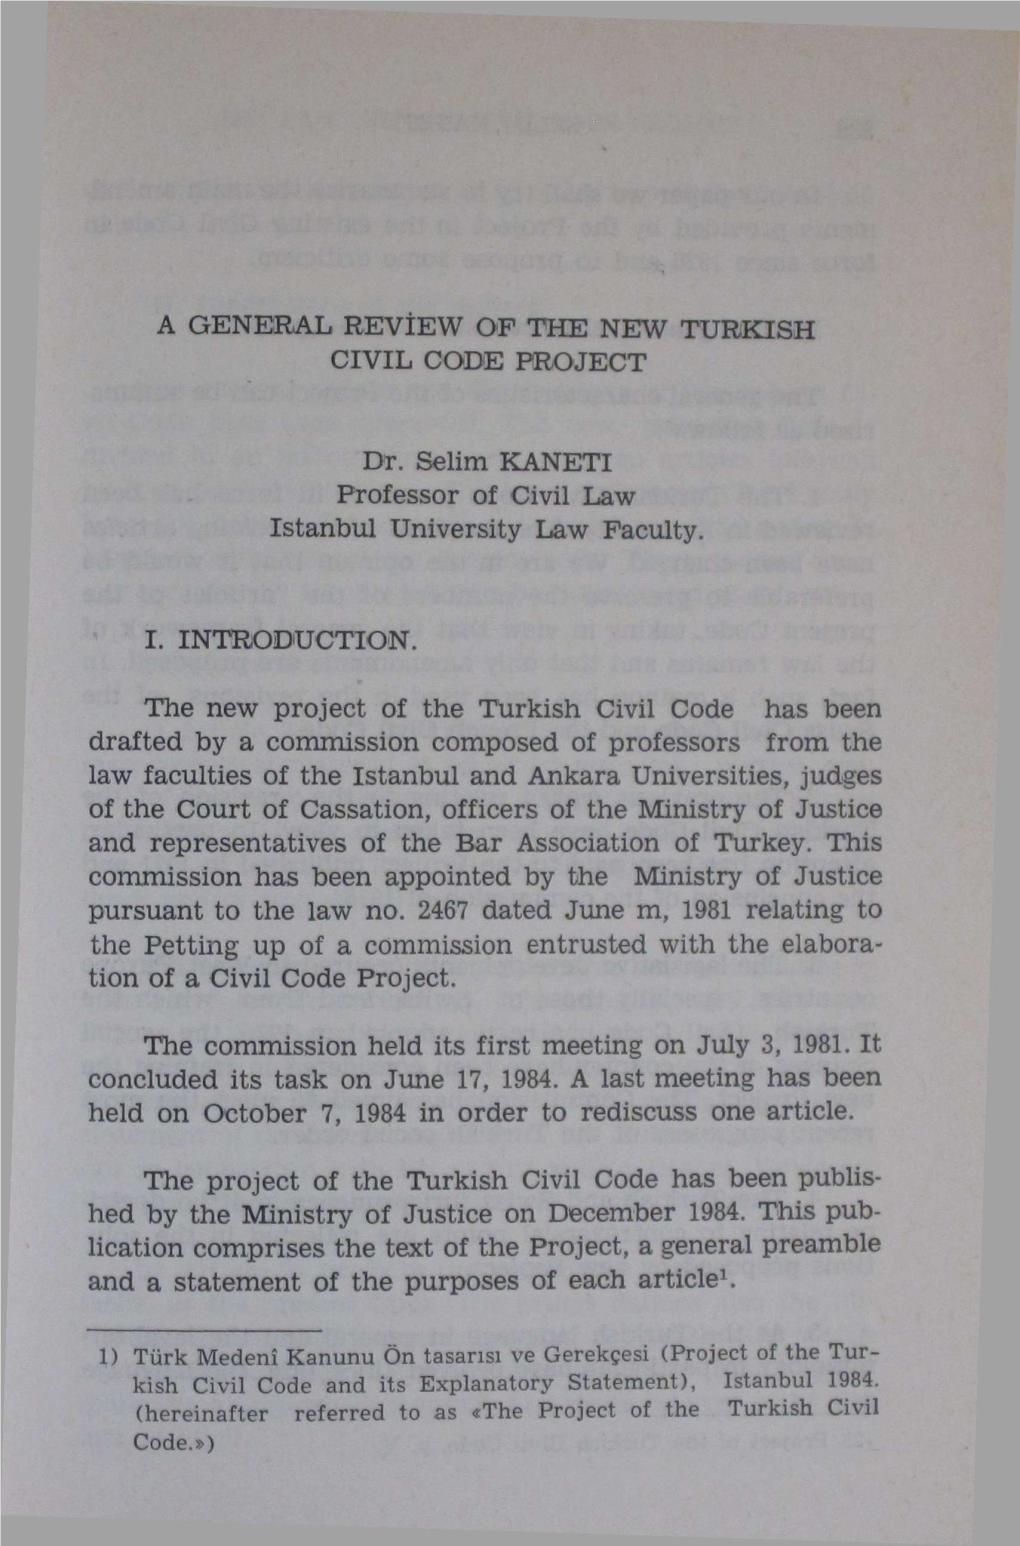 A General Review of the New Turkish Civil Code Project